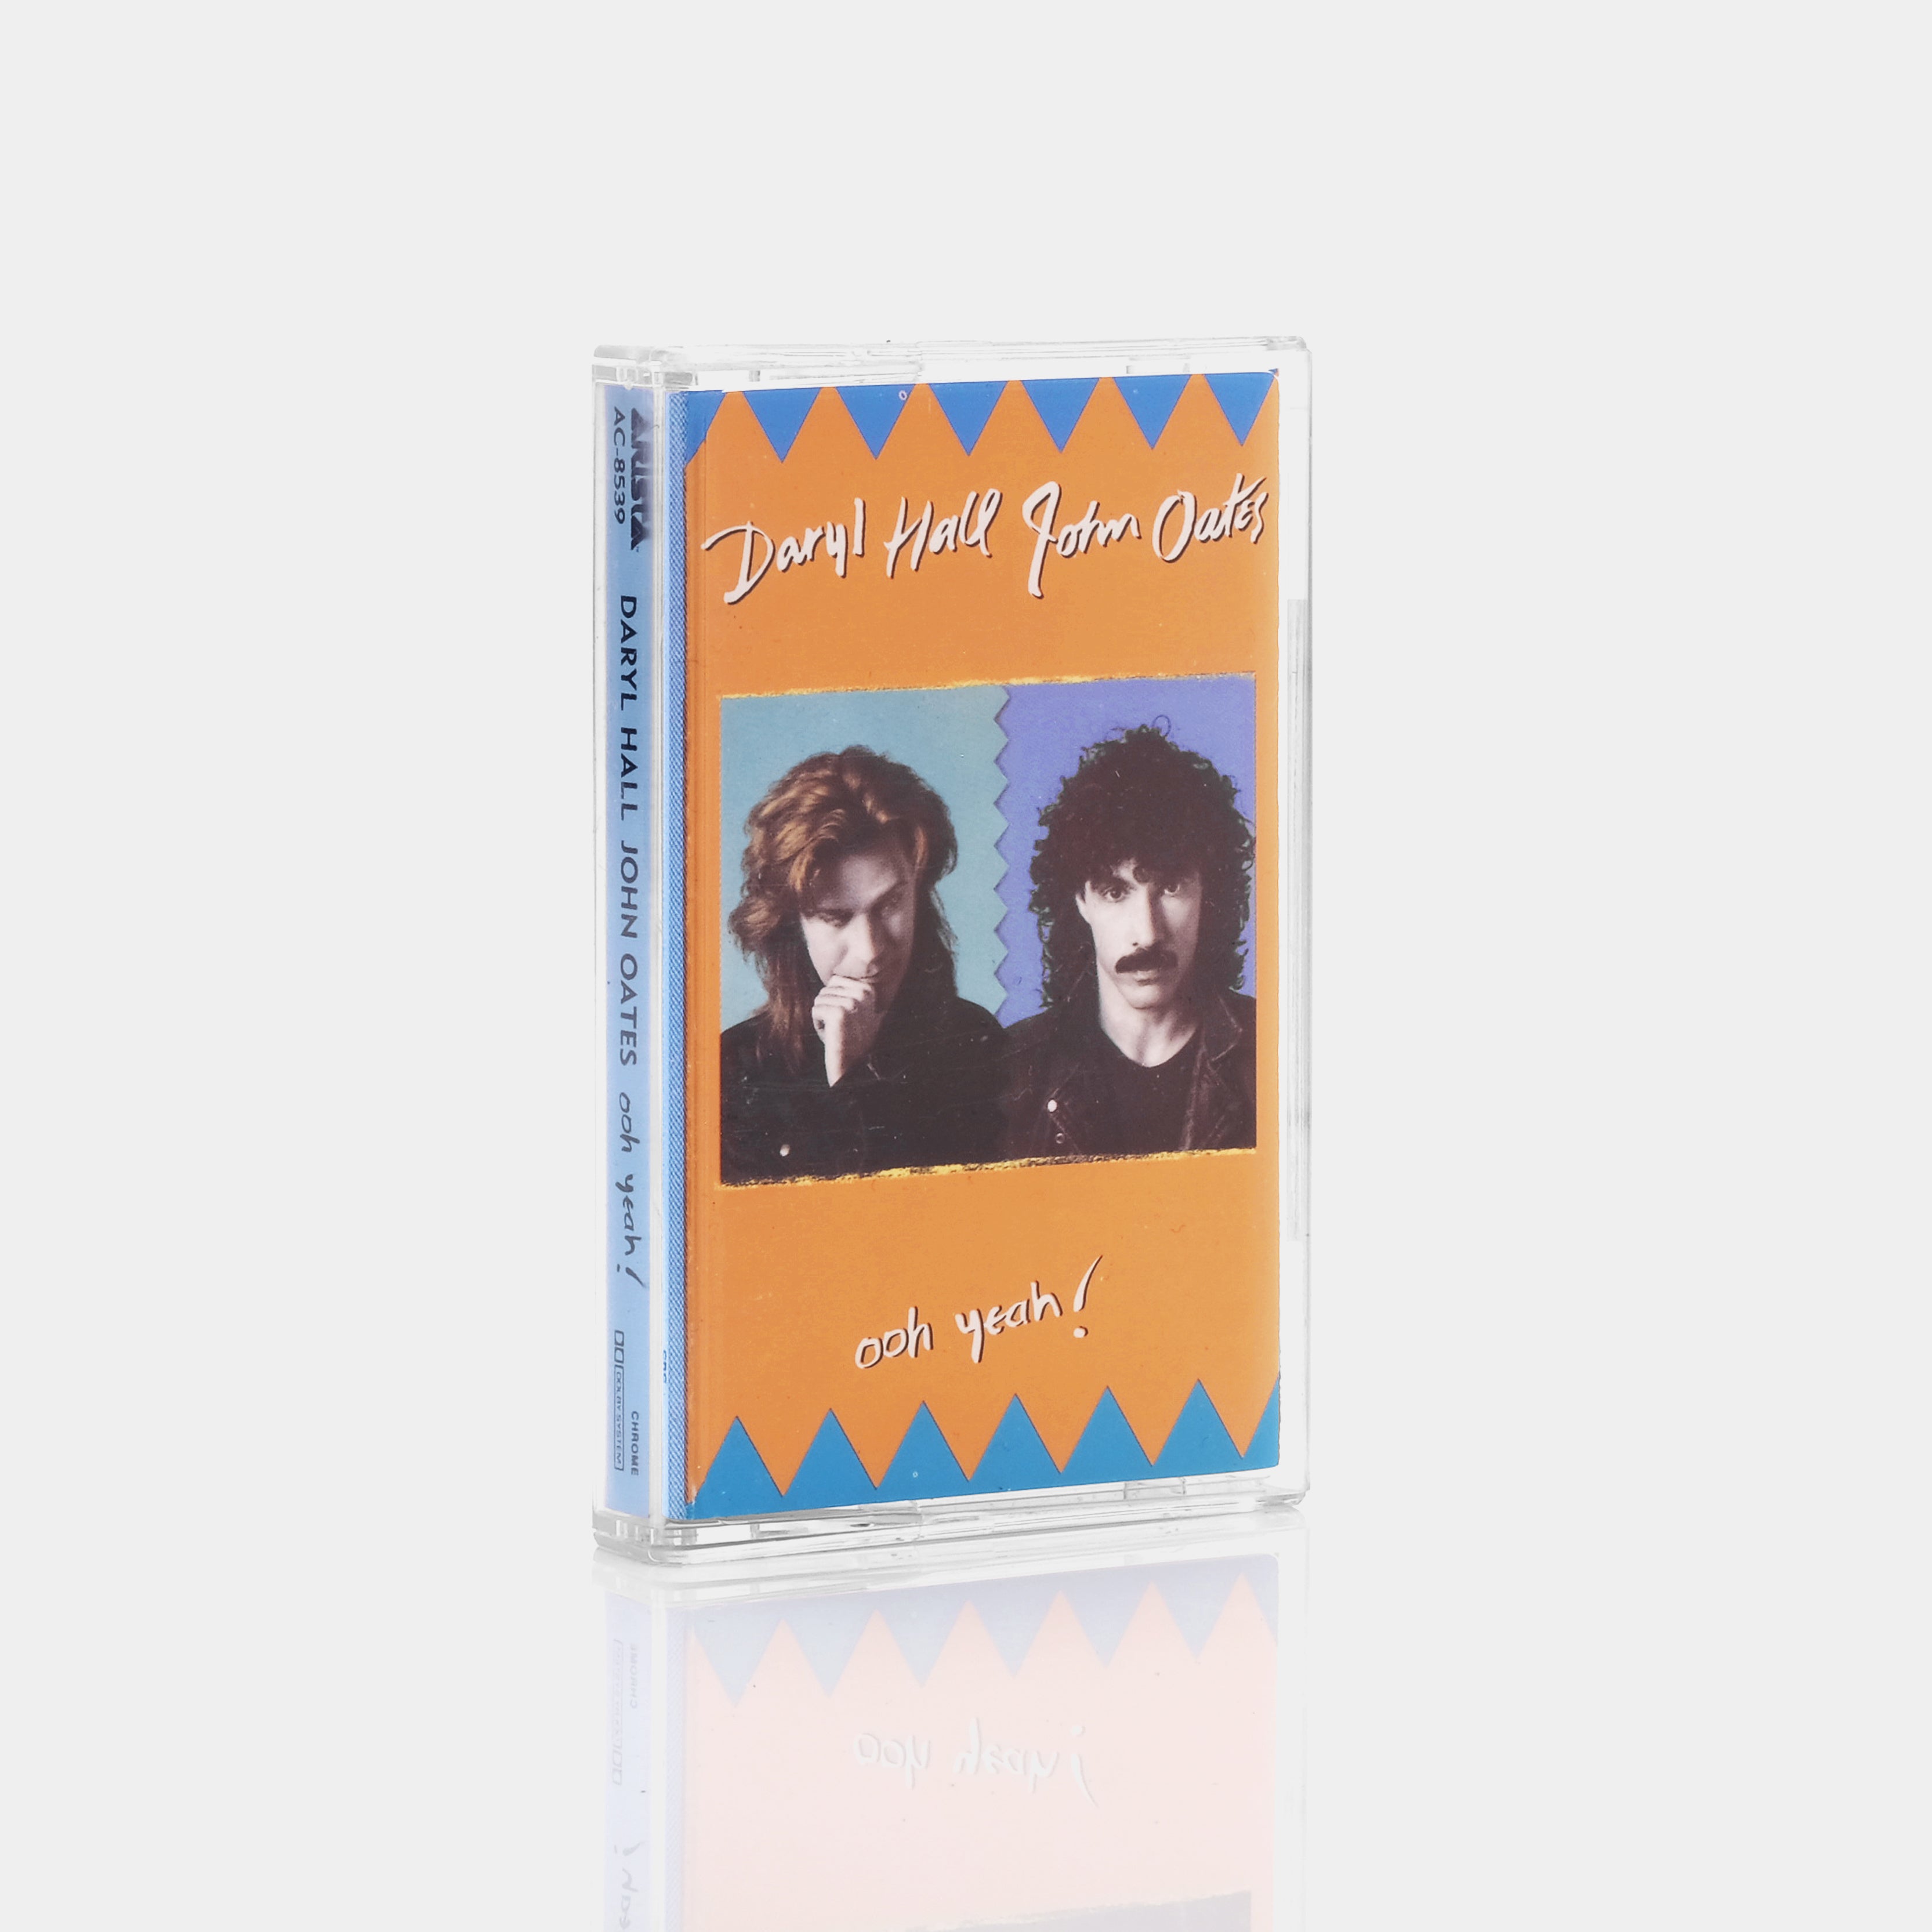 Daryl Hall And John Oates - Ooh Yeah! Cassette Tape